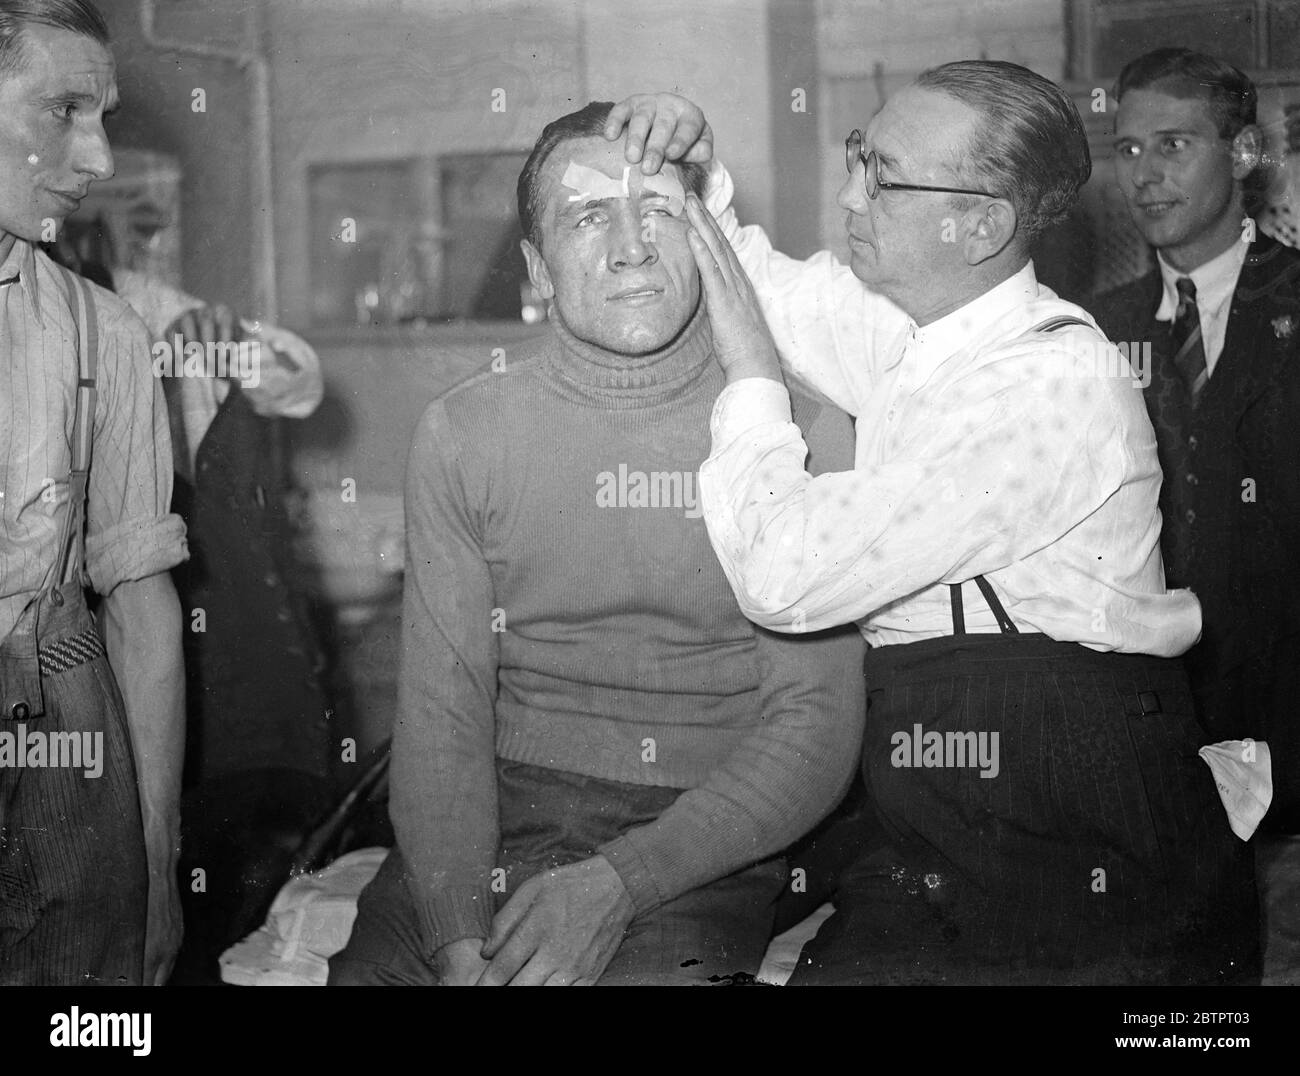 The fruits of victory!. Eddie Phillips has plaster over both eyes. Despite cuts over both eyes, Eddie Phillips, the London heavyweight, scored a points victory over Arno Kolblin, champion of Germany and Europe, in a 12 rounds contest at the Harringay Arena, London. Photo shows, Eddie Phillips cut eyes being liberally bedecked with sticking plaster by his manager, Sam Russell, after the fight. 4 November 1937 Stock Photo